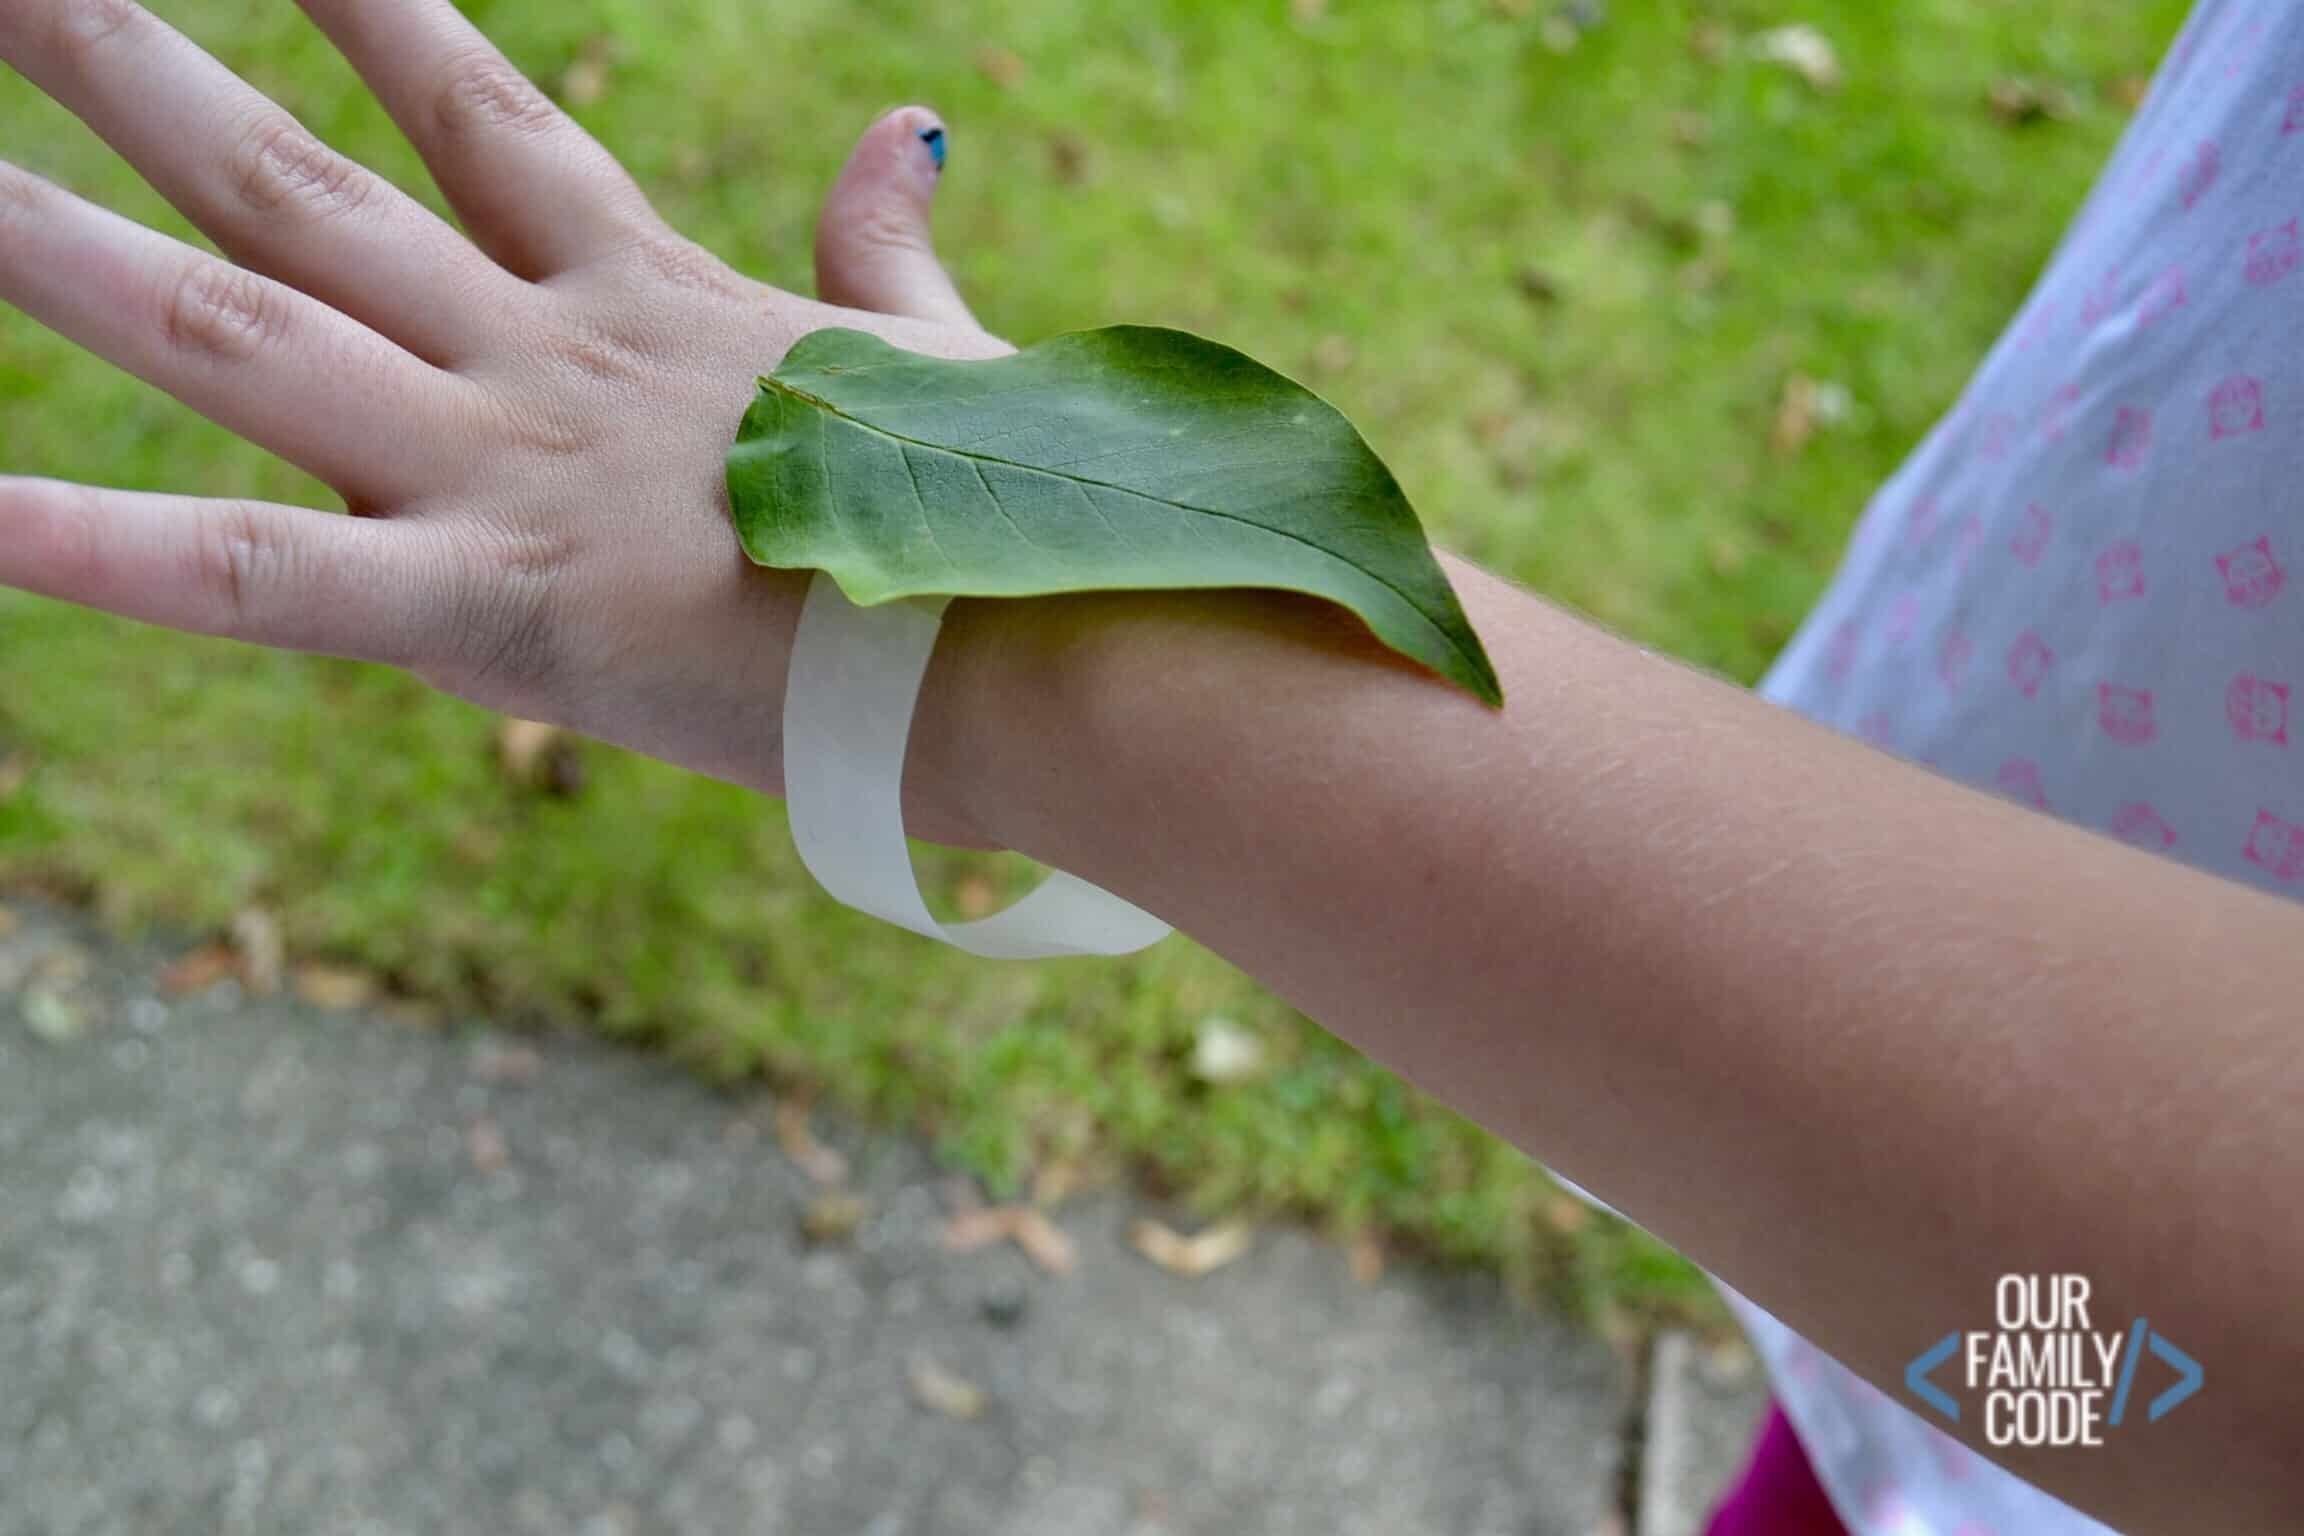 nature walk crafts make a leaf bracelet These nature crafts and activities will have taking nature walks all season long! Check out our top 10 nature walk crafts and activities!